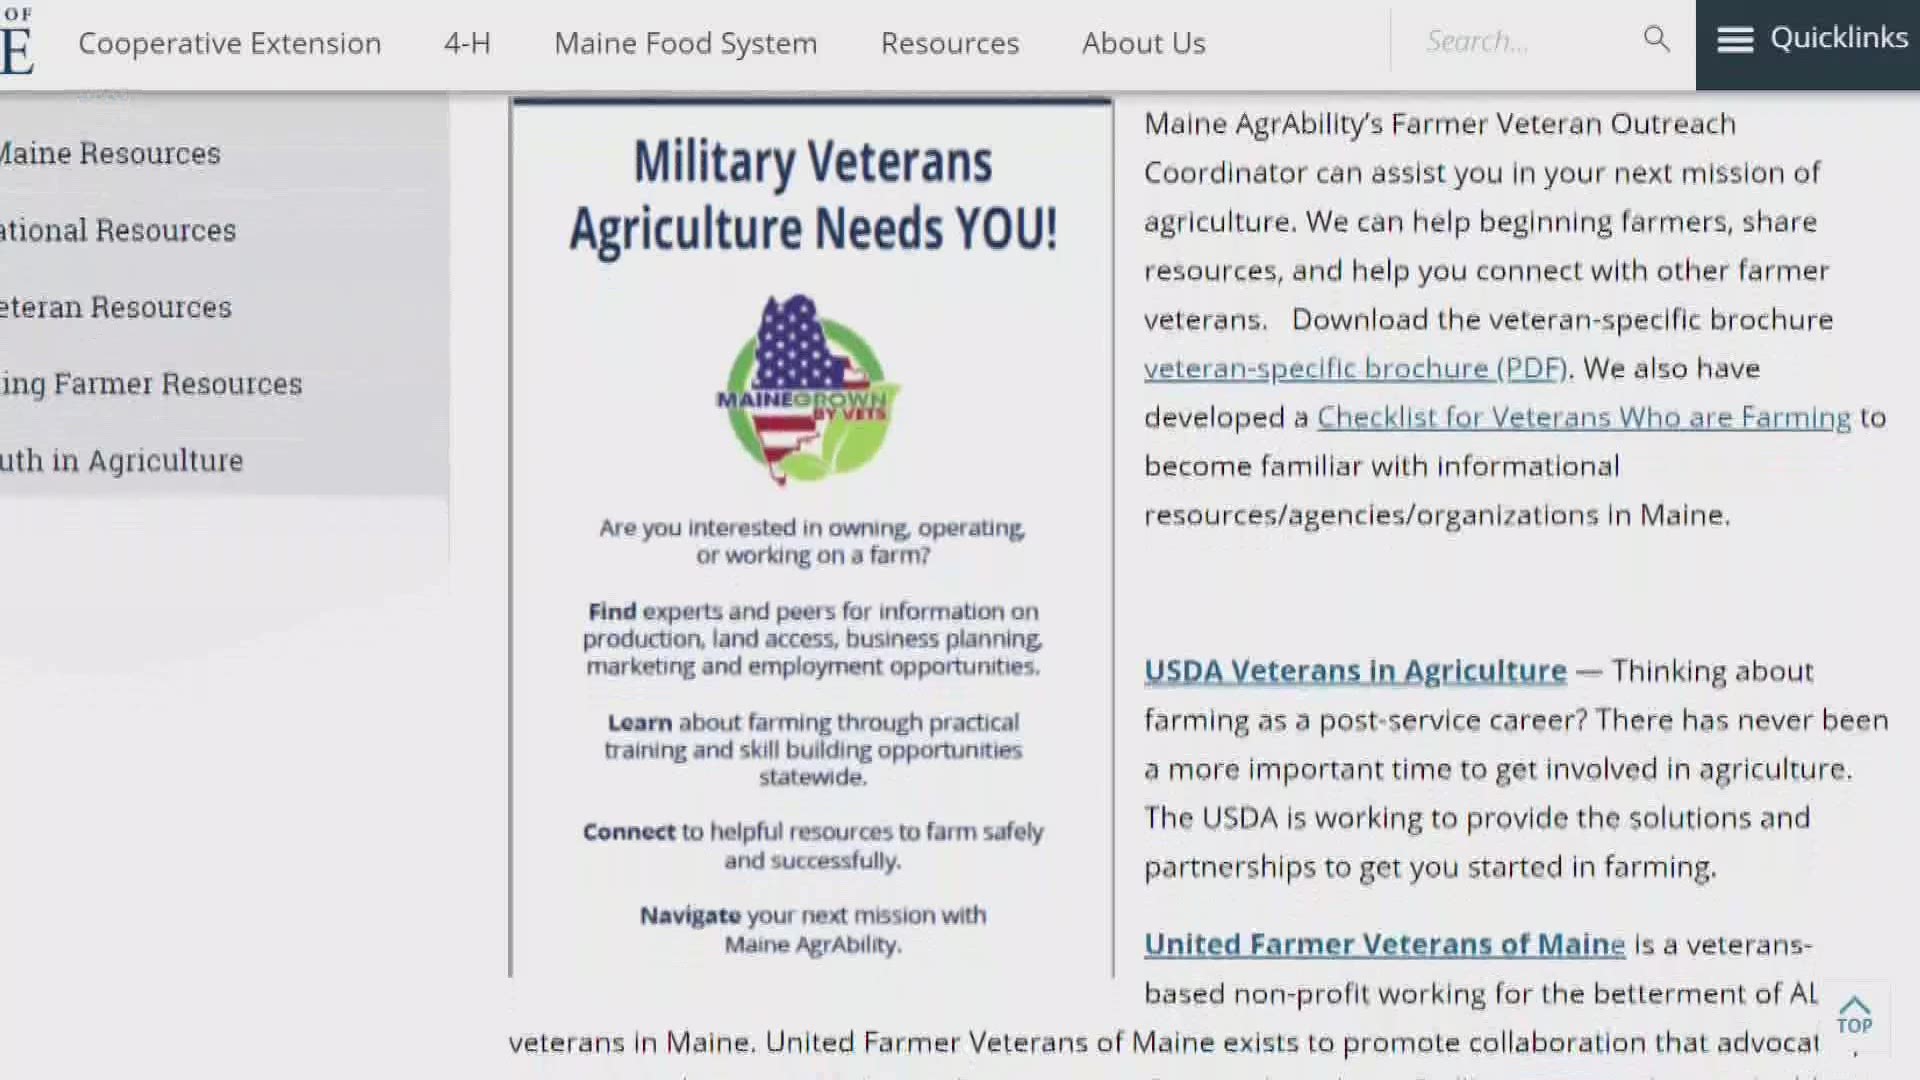 Maine AgrAbility, UMaine provide resources for veterans with growing interest in farming